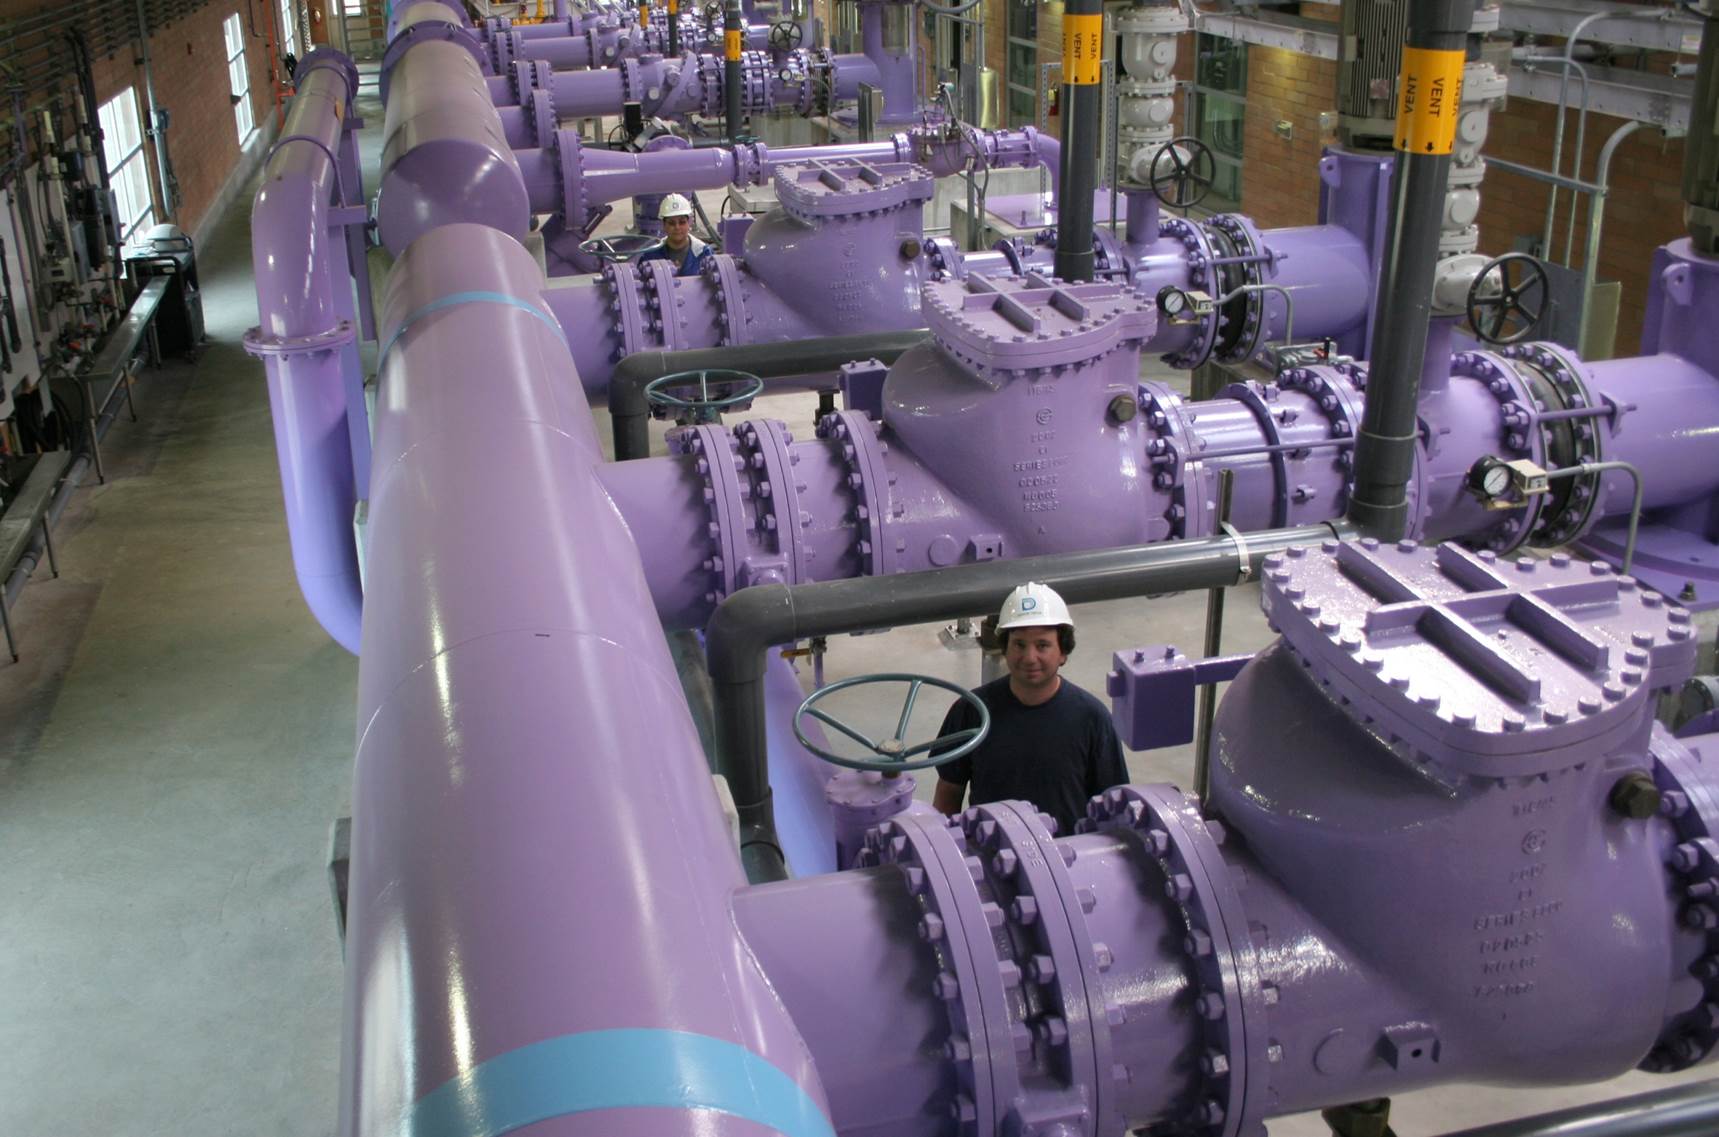 Construction crews install a 20-foot section of purple pipe in Denver's Stapleton neighborhood.